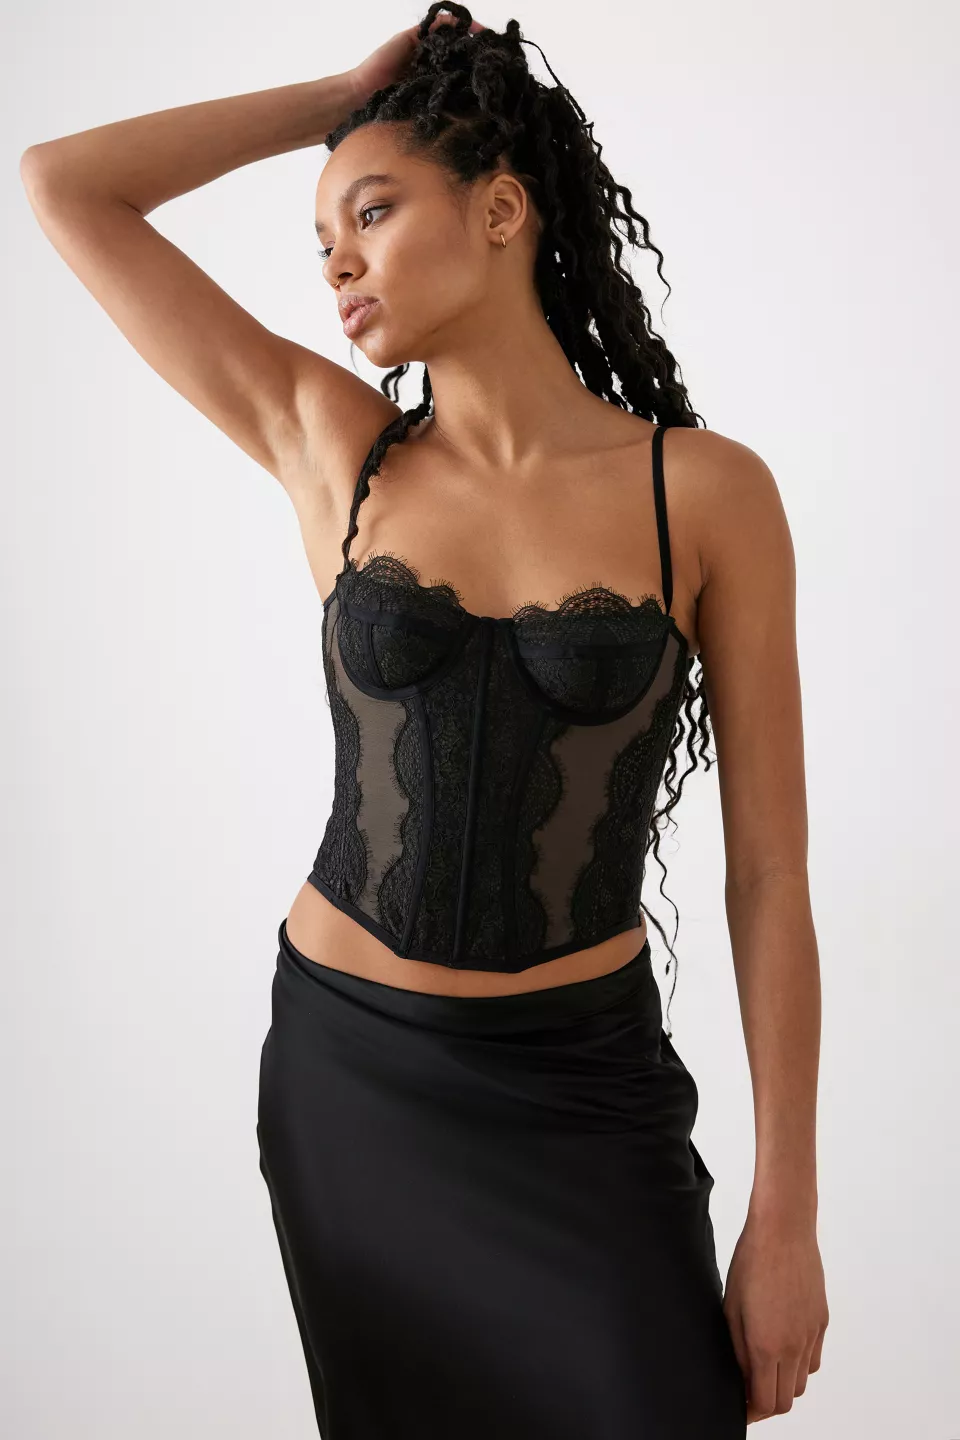 Out From Under – Corset Modern Love à 55 € chez Urban Outfitters